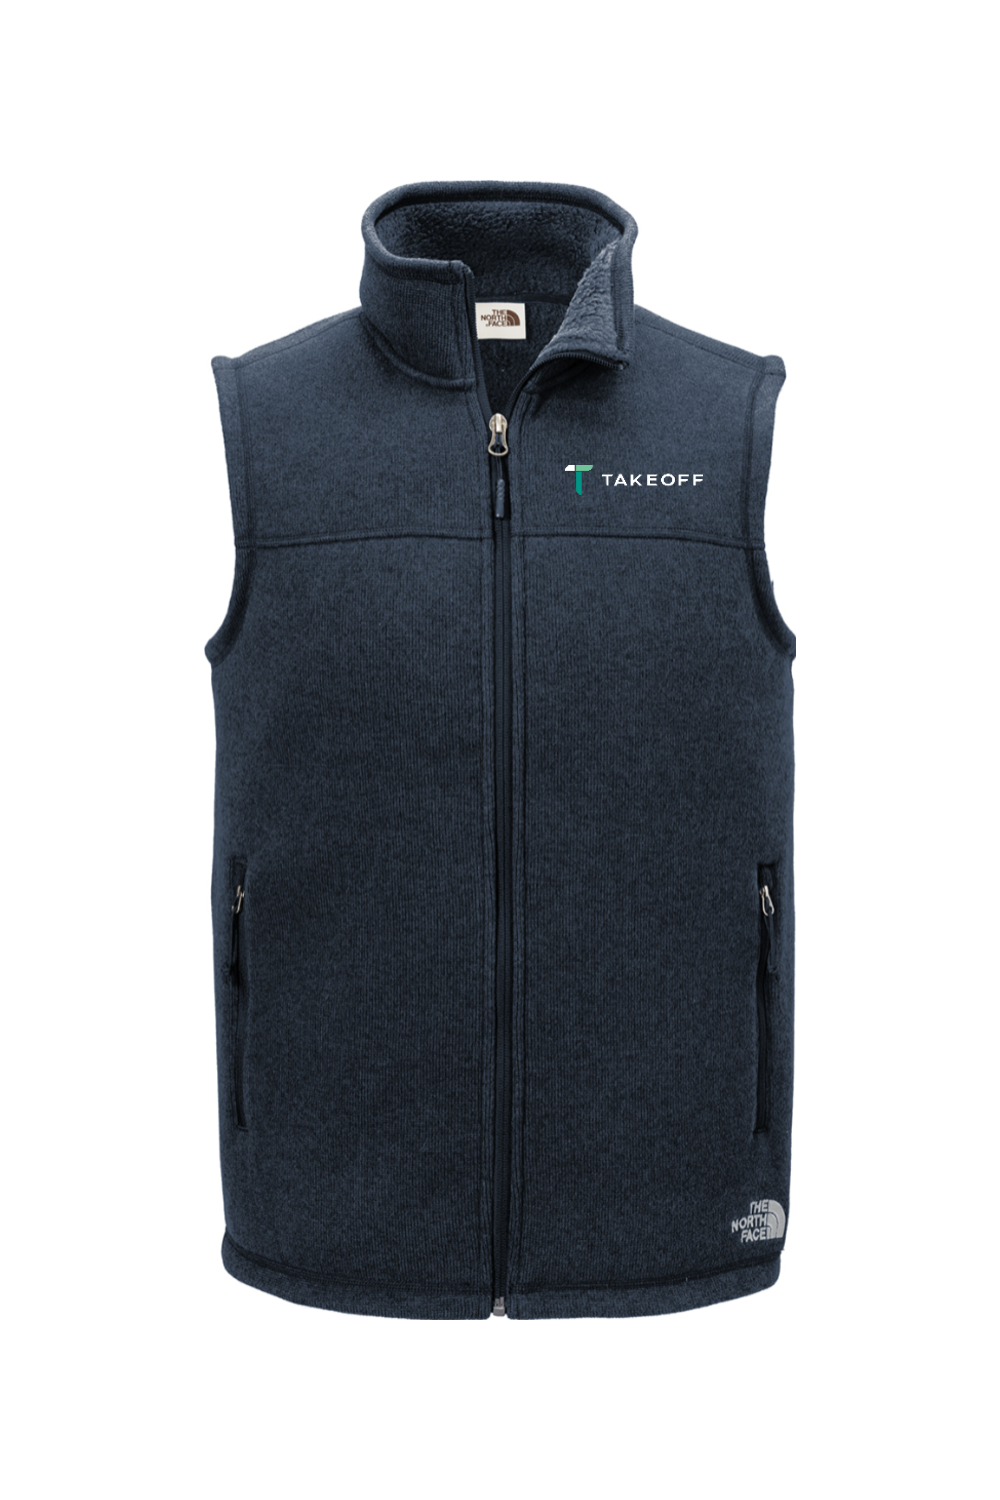 Take off - The North Face Sweater Fleece Vest